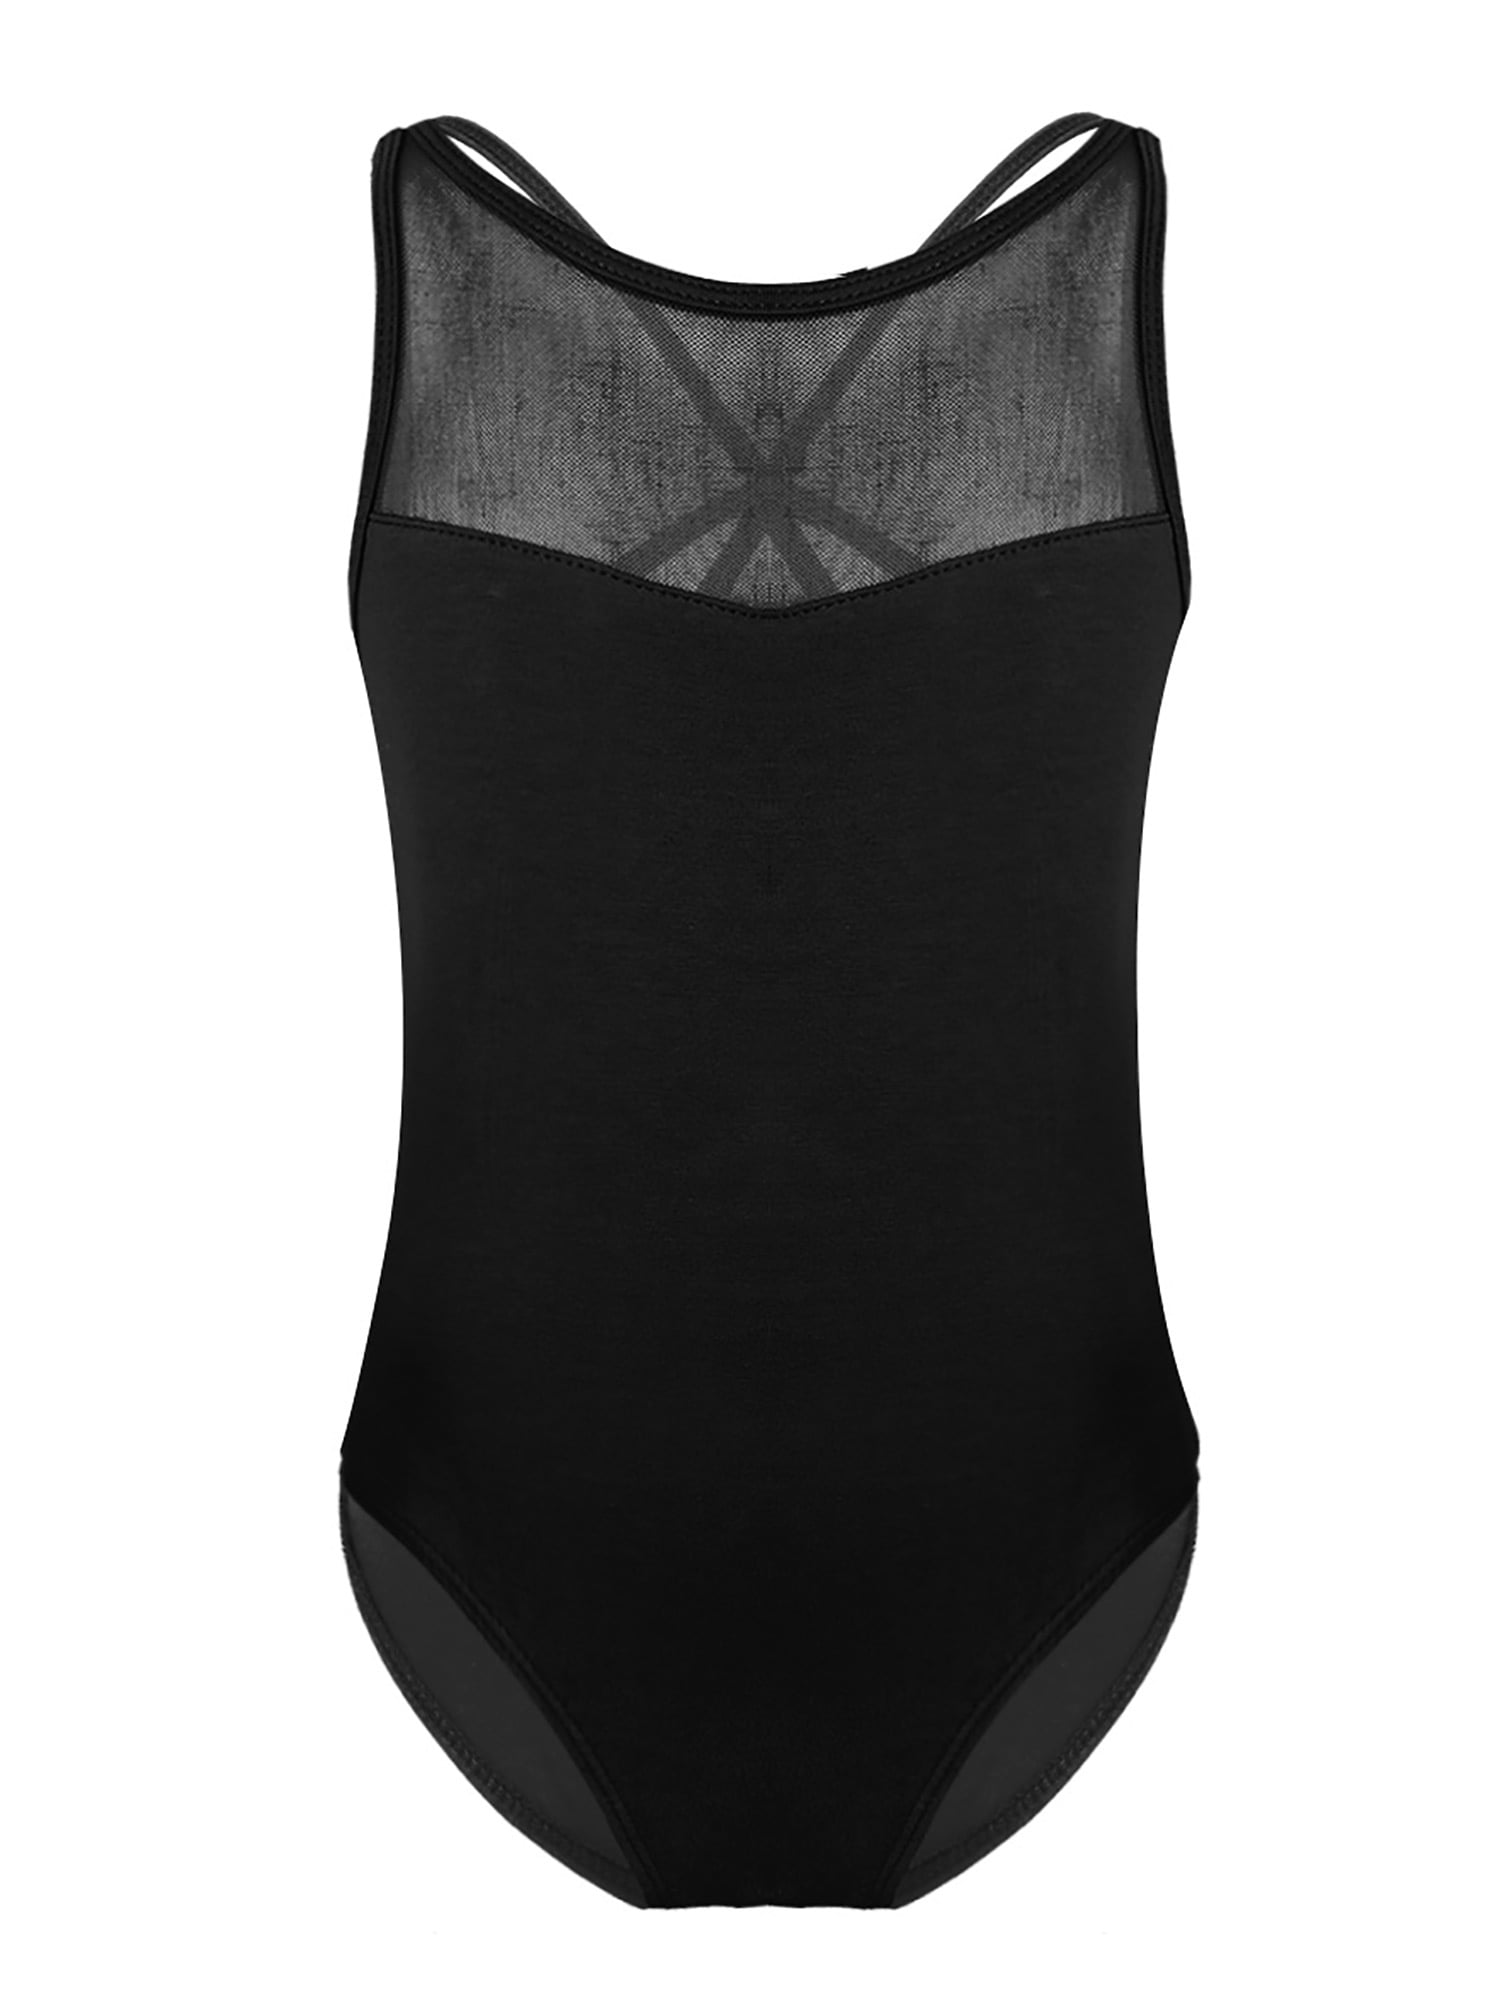 CHICTRY Womens Strappy Ballet Dance Leotard Camisole Backless Cross Criss Gymnastic Bodysuit 